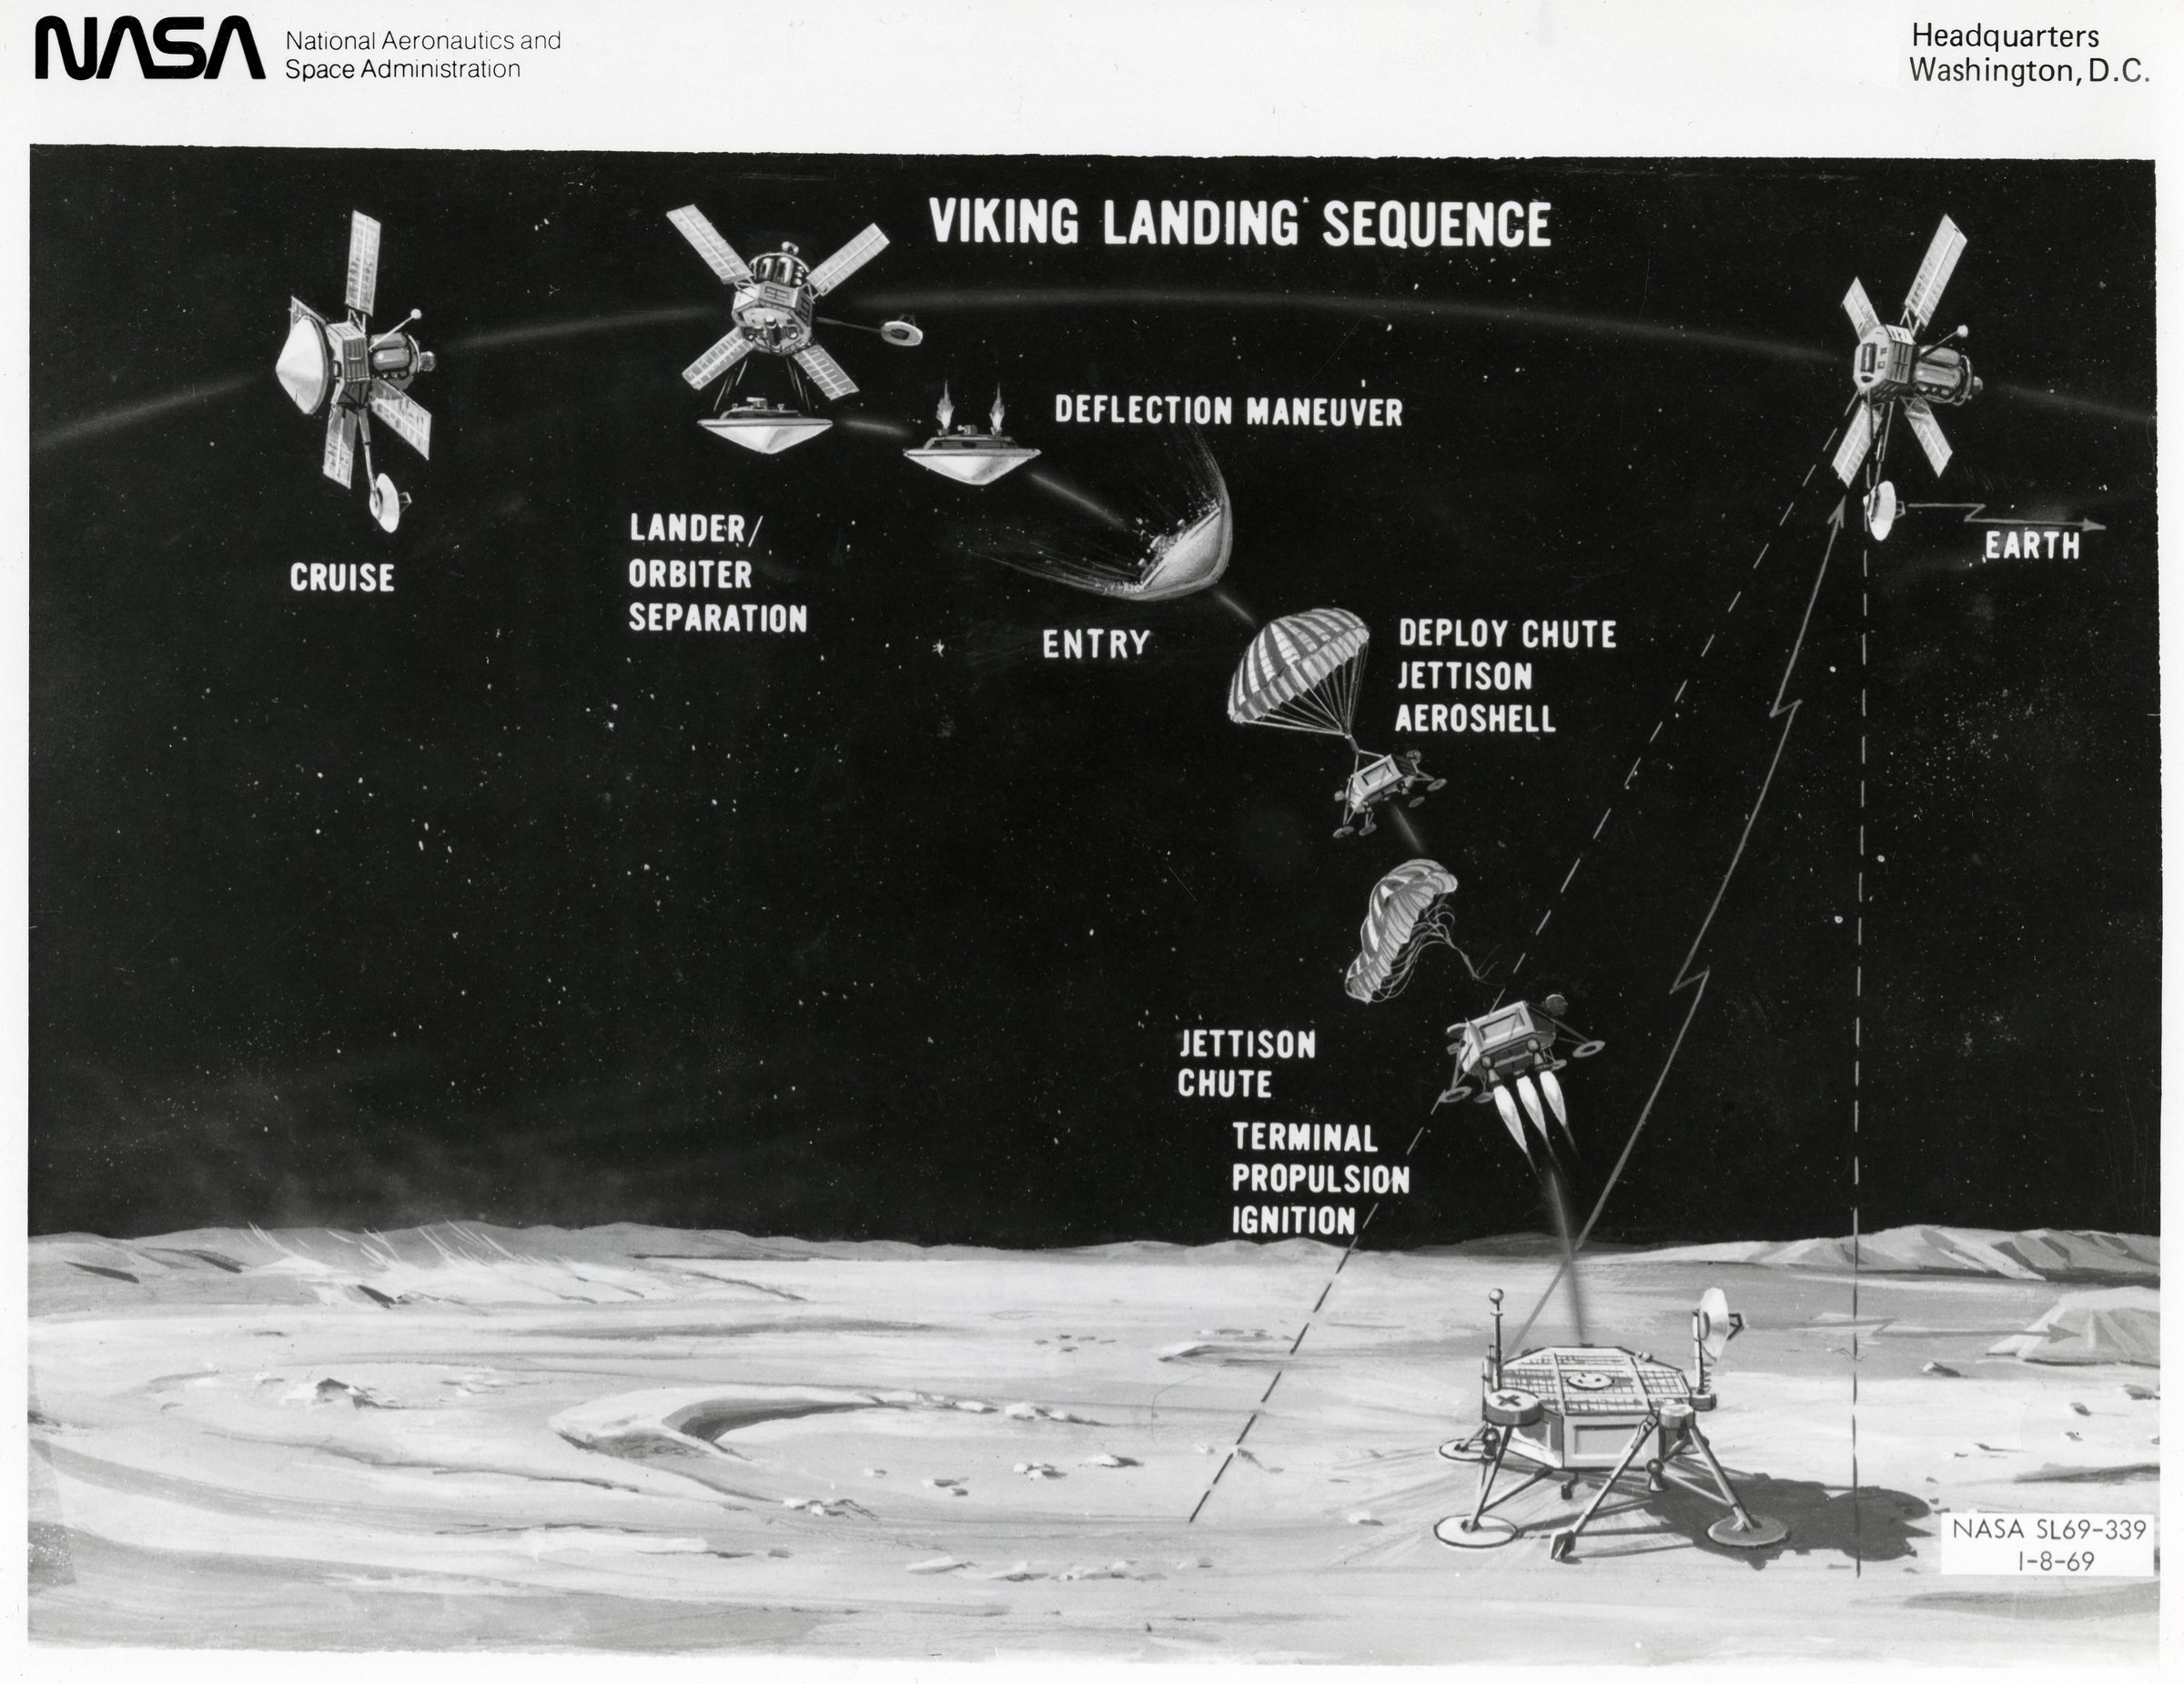 Black and white illustrations of the Entry, Descent, and Landing (EDL) sequences for the Viking lander on the surface of Mars.